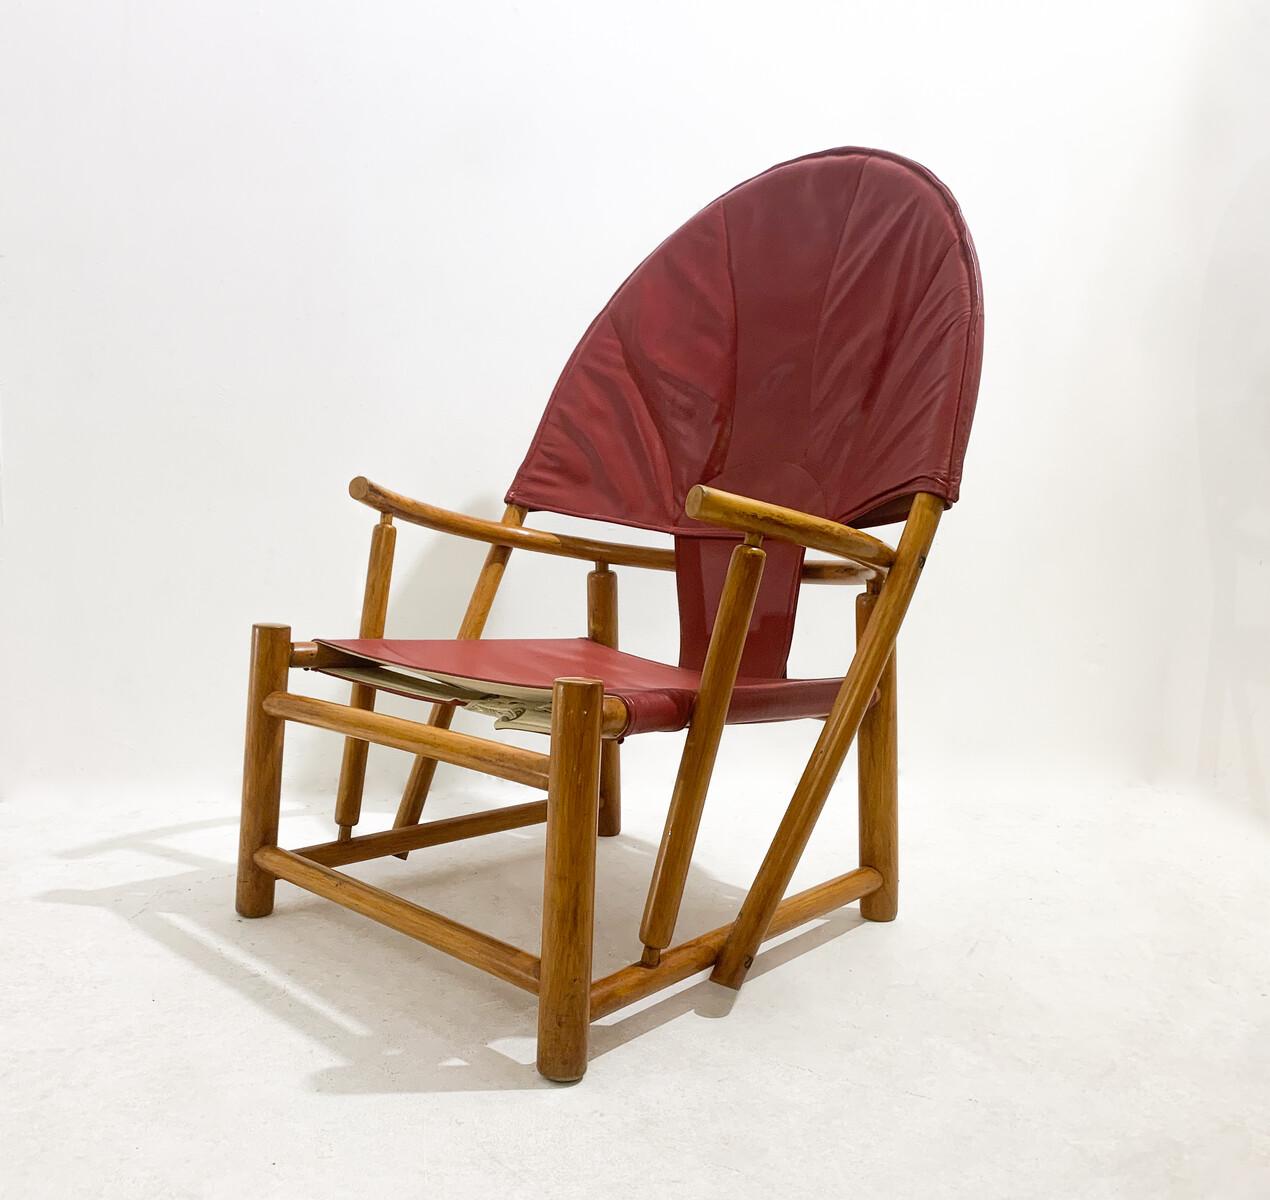 Red G23 Hoop Armchair by Piero Palange & Werther Toffoloni, 1970s For Sale 1